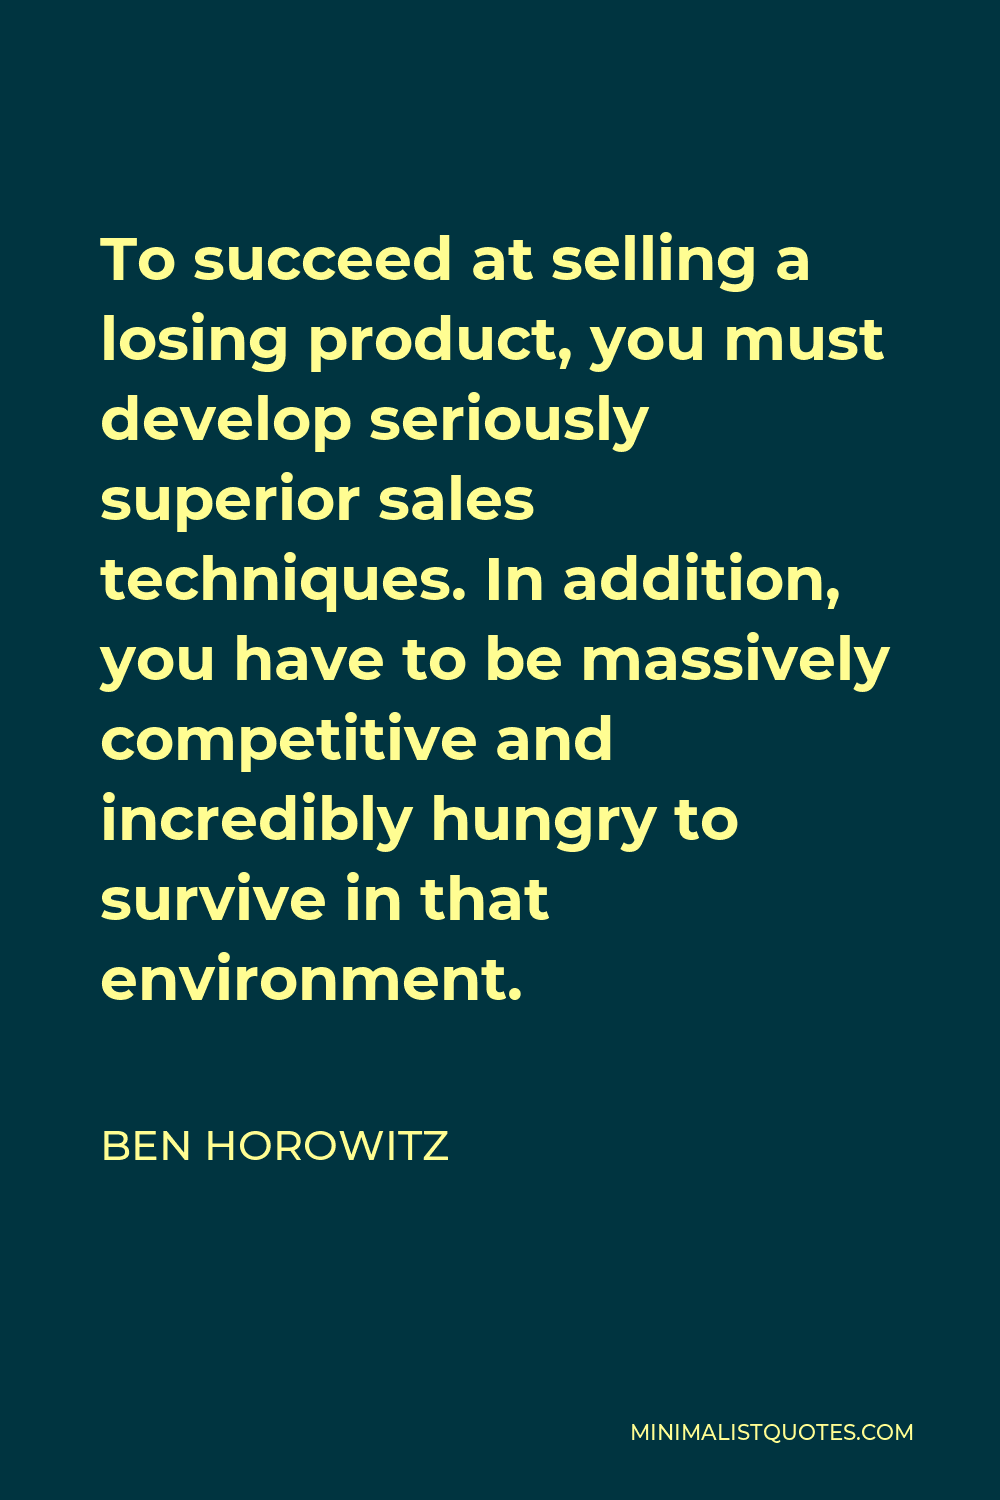 Ben Horowitz Quote - To succeed at selling a losing product, you must develop seriously superior sales techniques. In addition, you have to be massively competitive and incredibly hungry to survive in that environment.